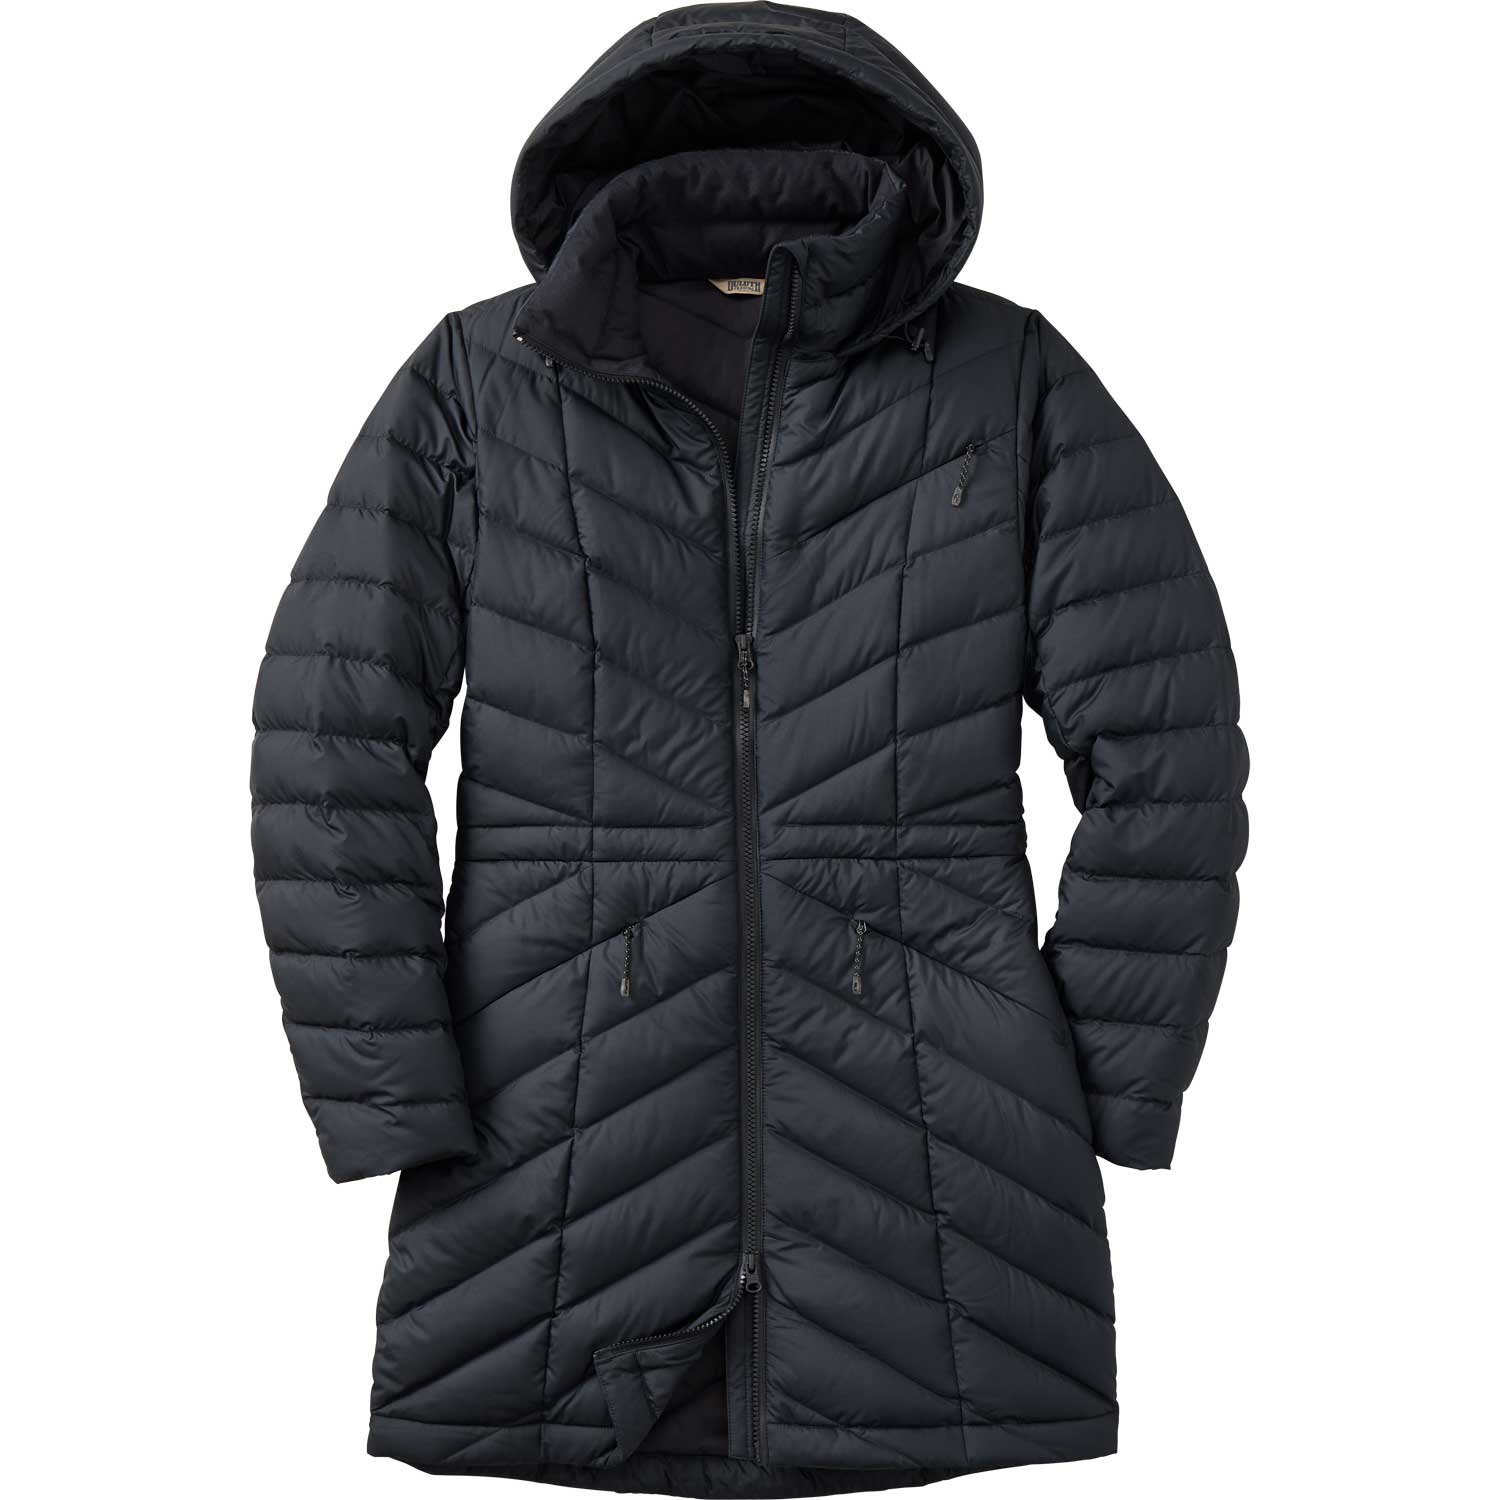 Duluth Trading Co. Women's Plus Cold Reliable Down Coat 